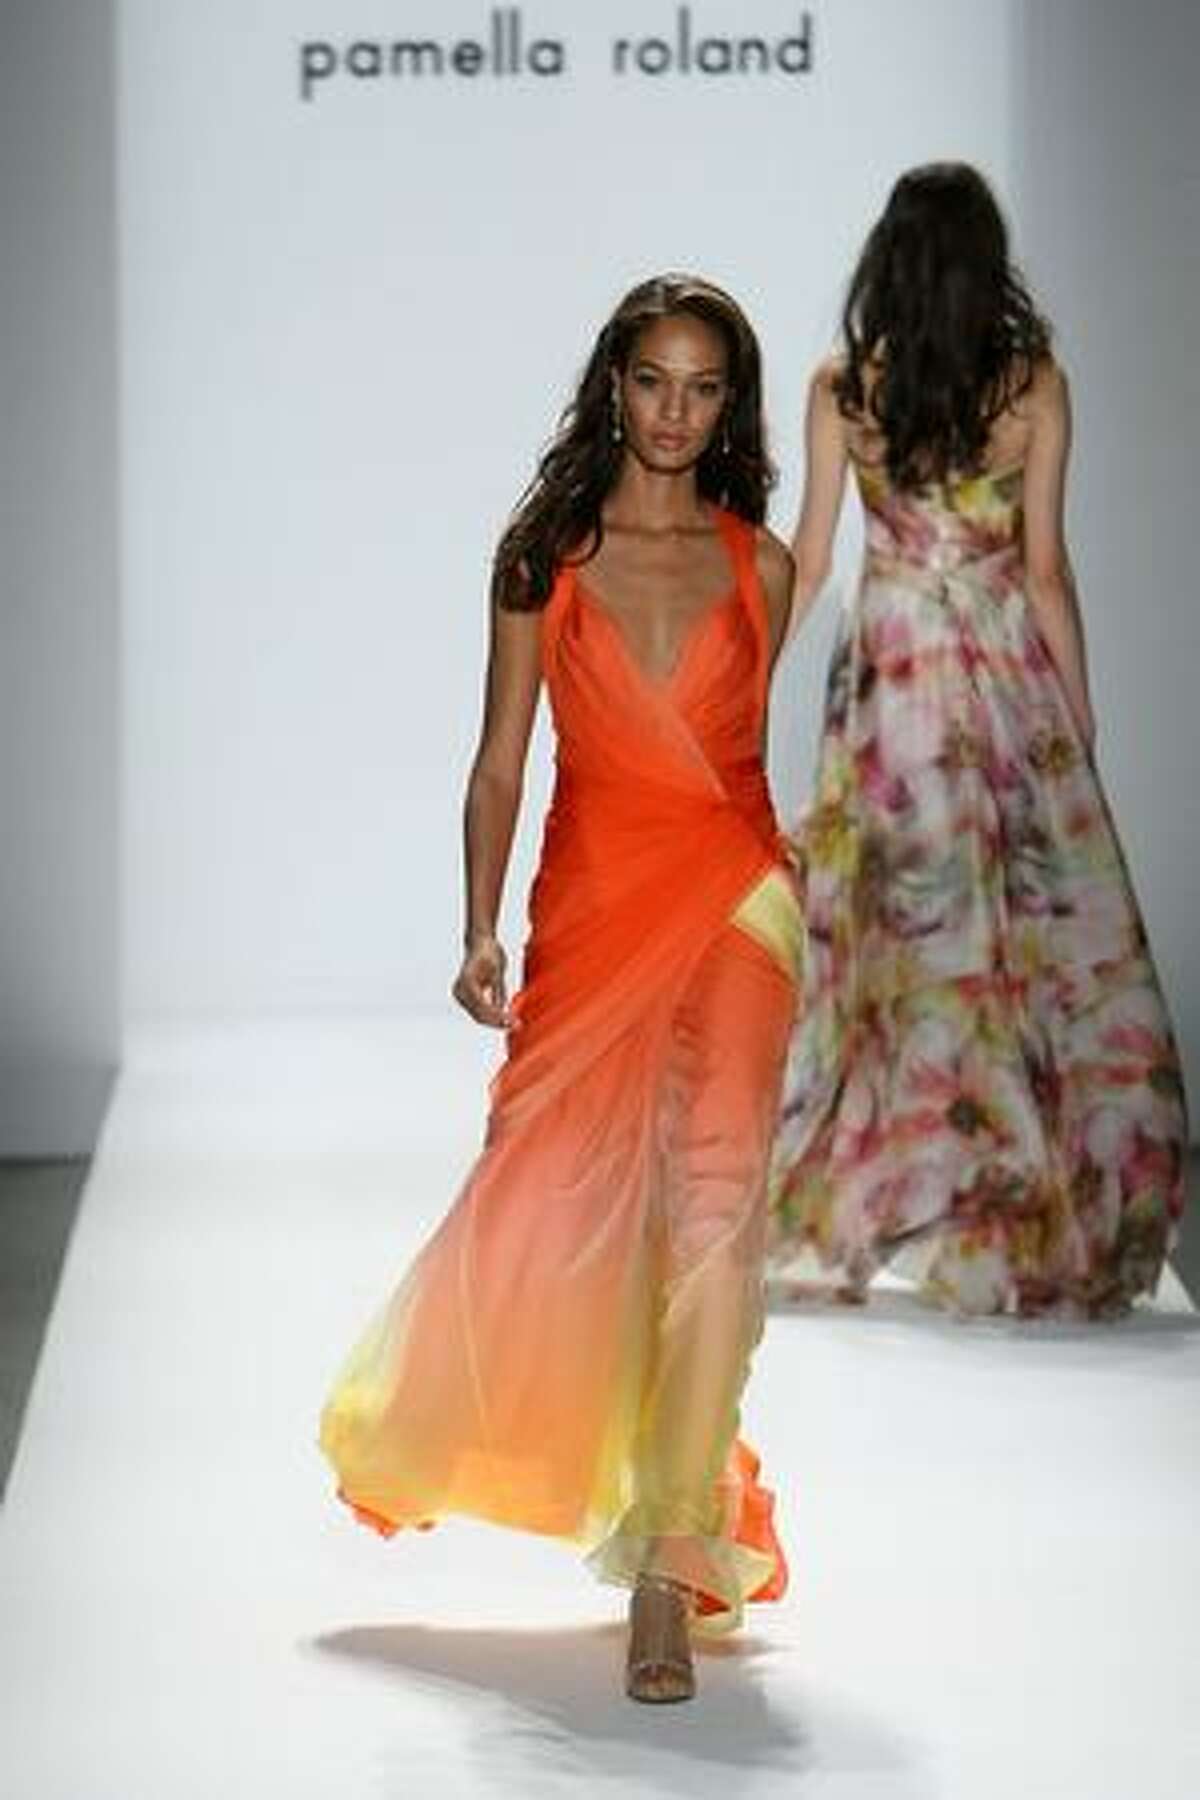 A model wears fashions by designer Pamella Roland during the Spring/Summer 2010 collections Mercedes-Benz Fashion Week in New York.